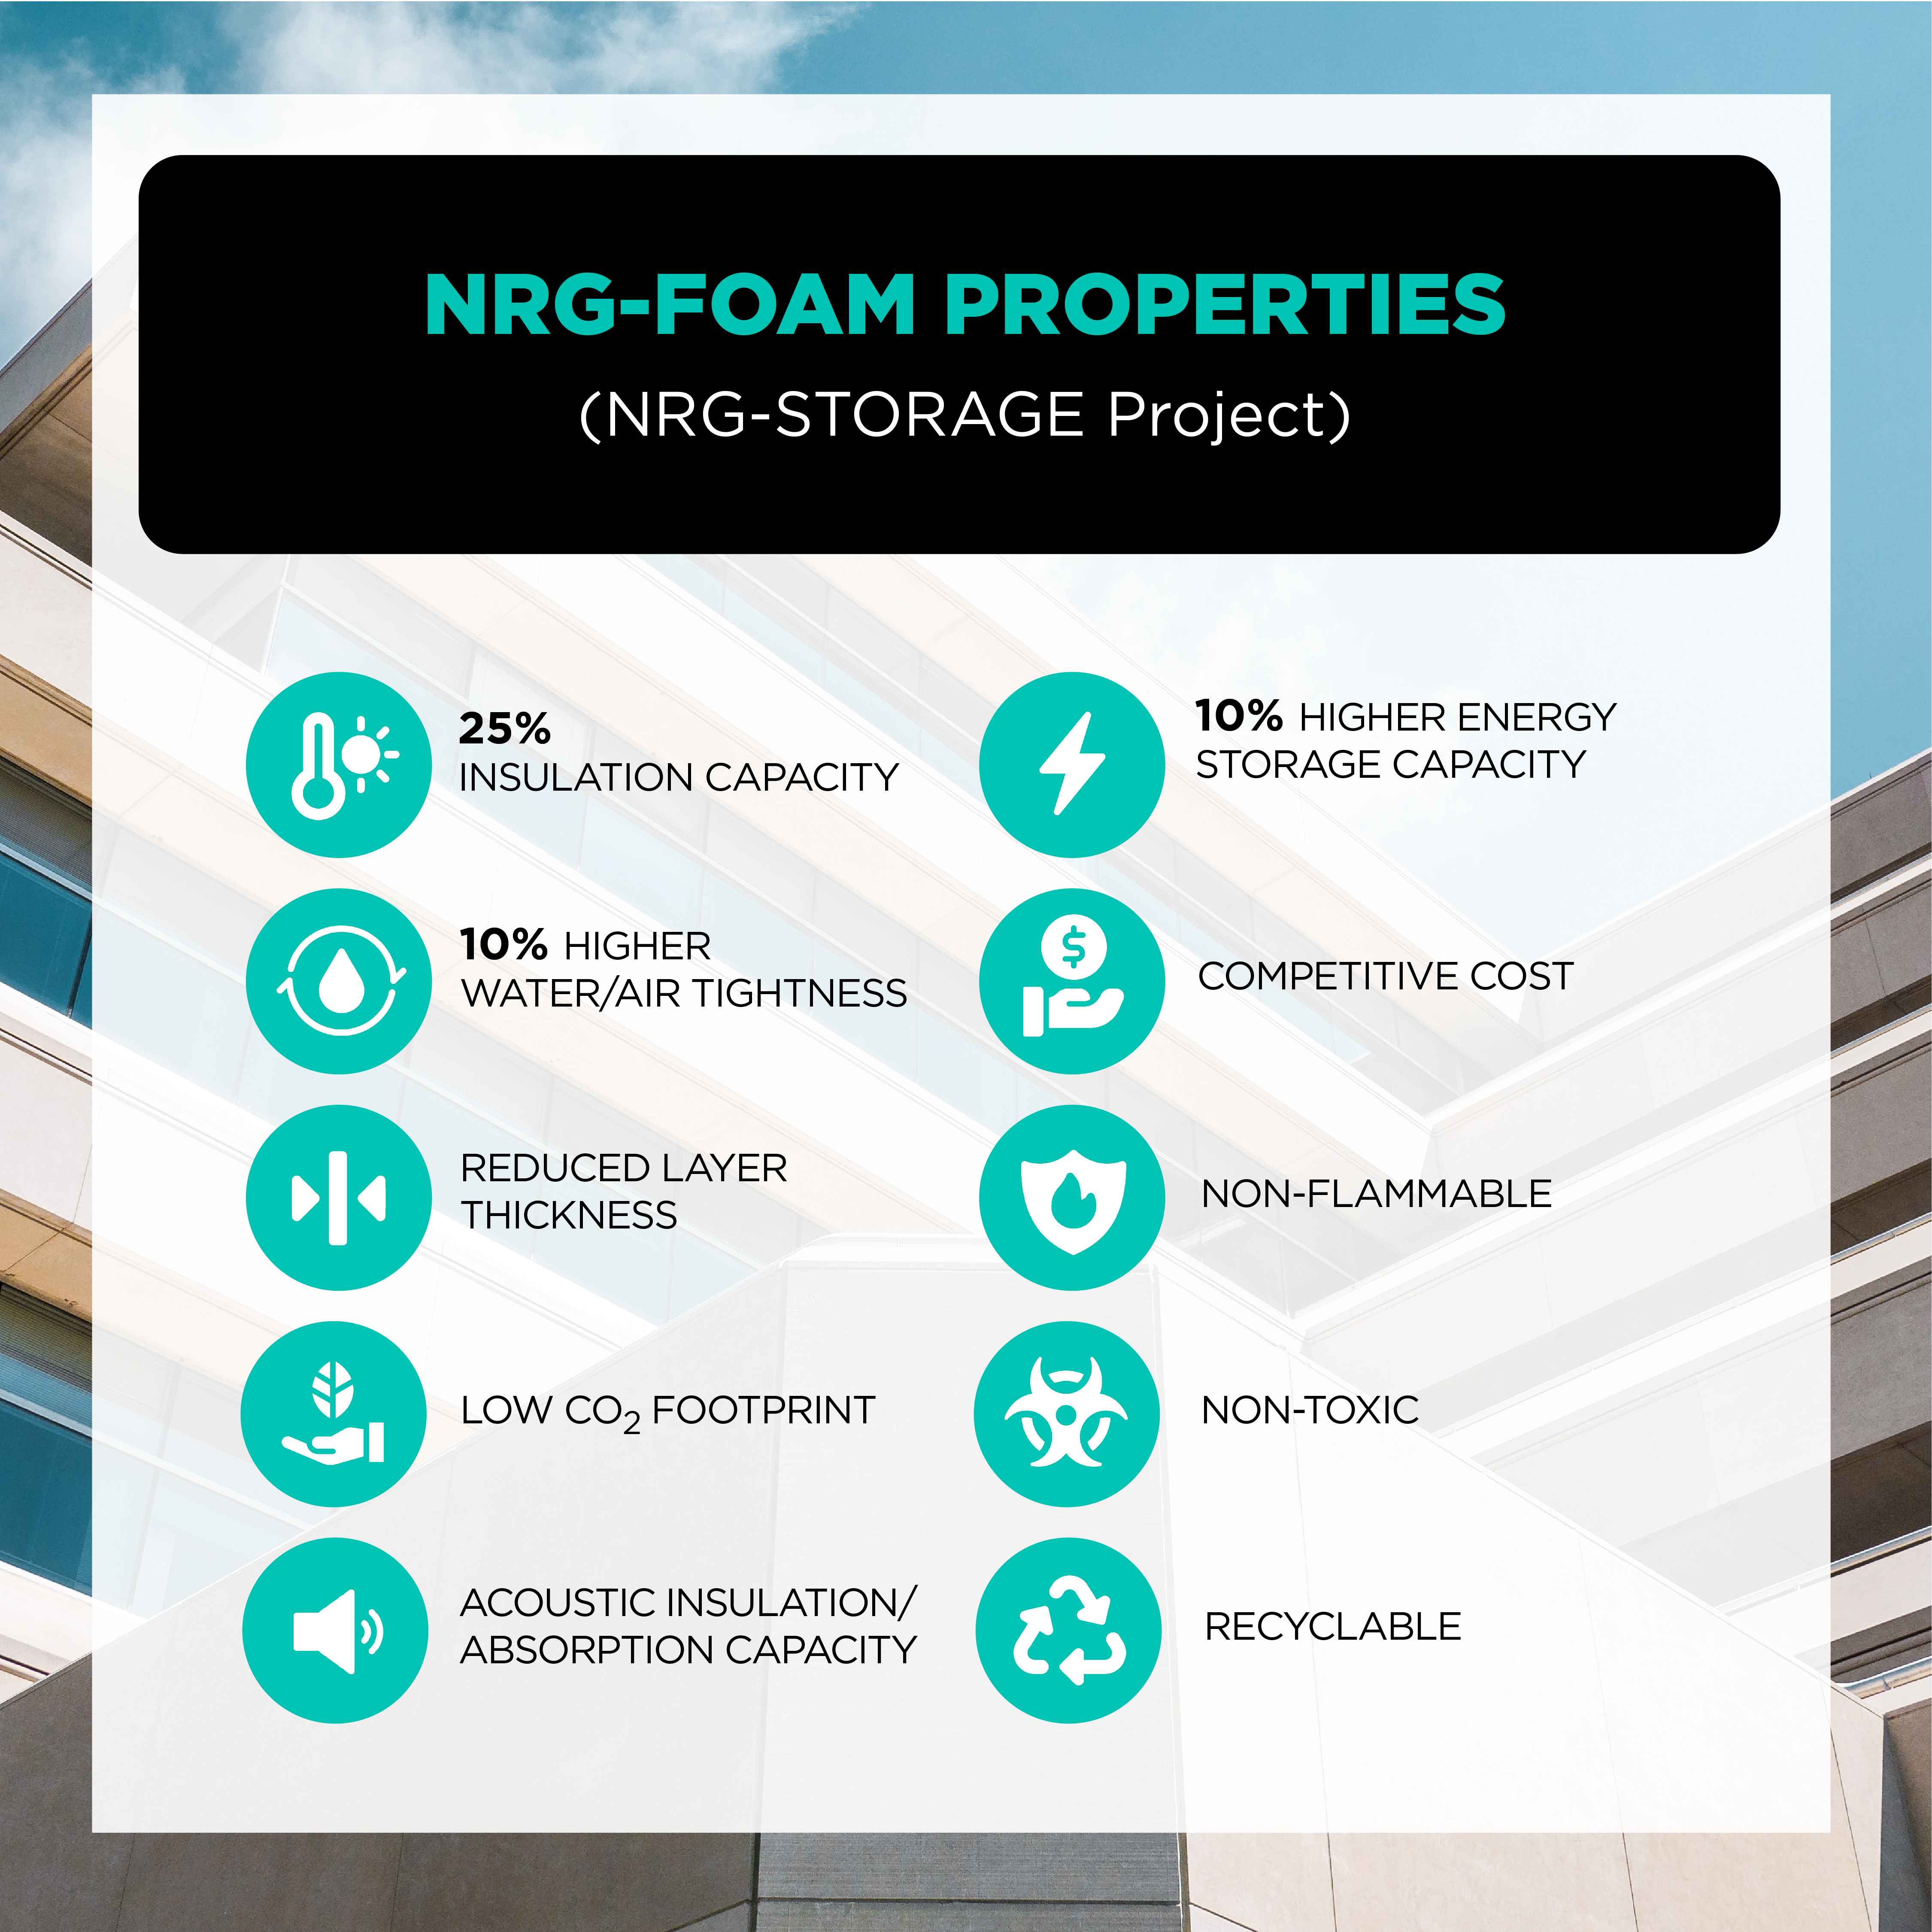 Properties of NRG-FOAM, developed within the european NRG-Storage project.